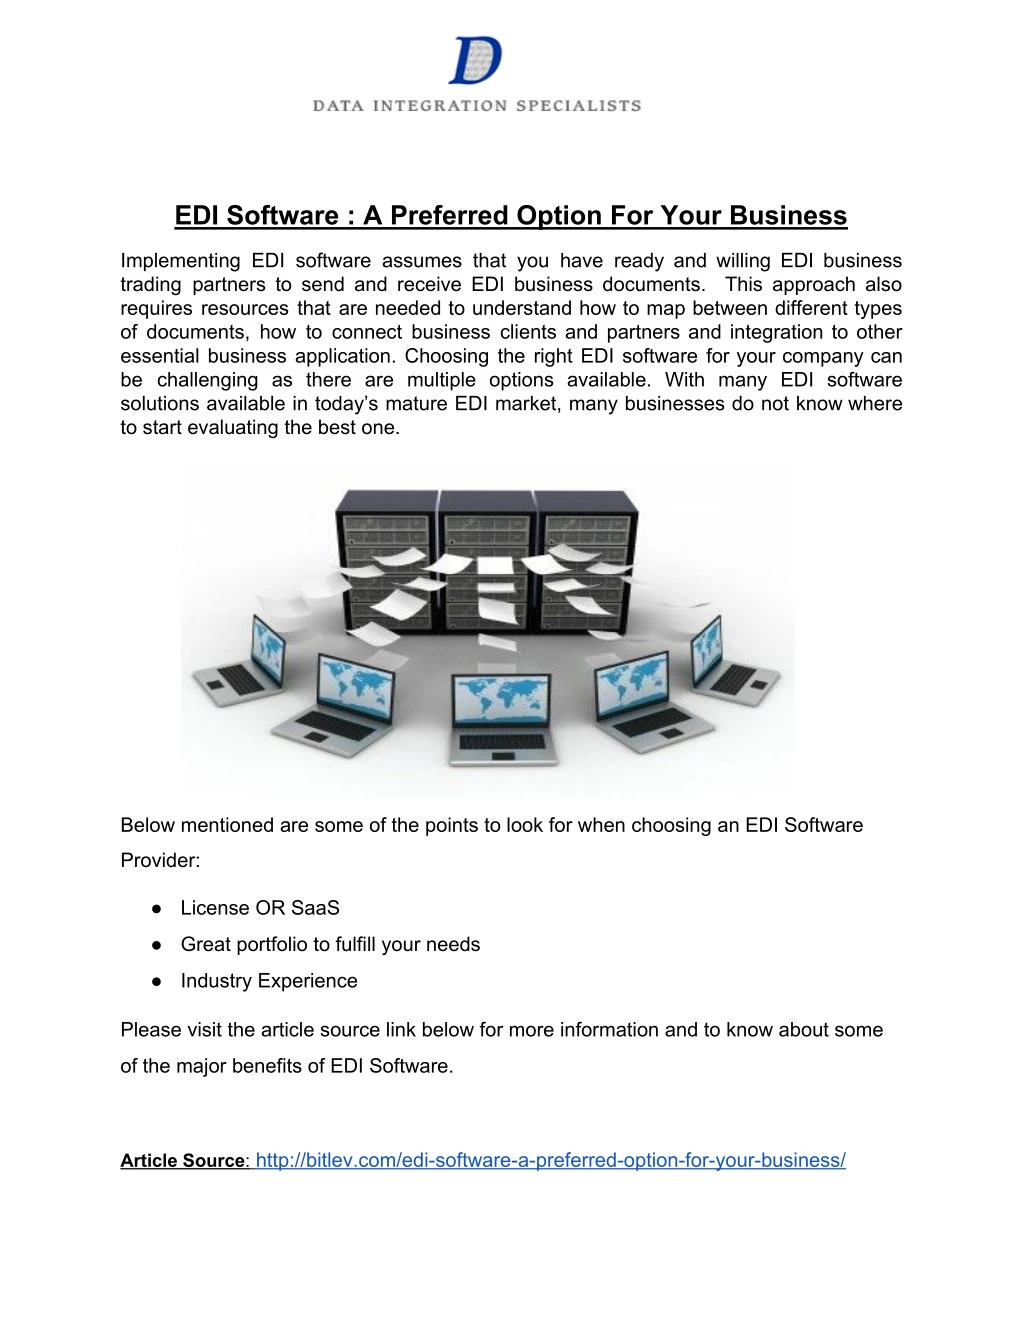 edi software a preferred option for your business